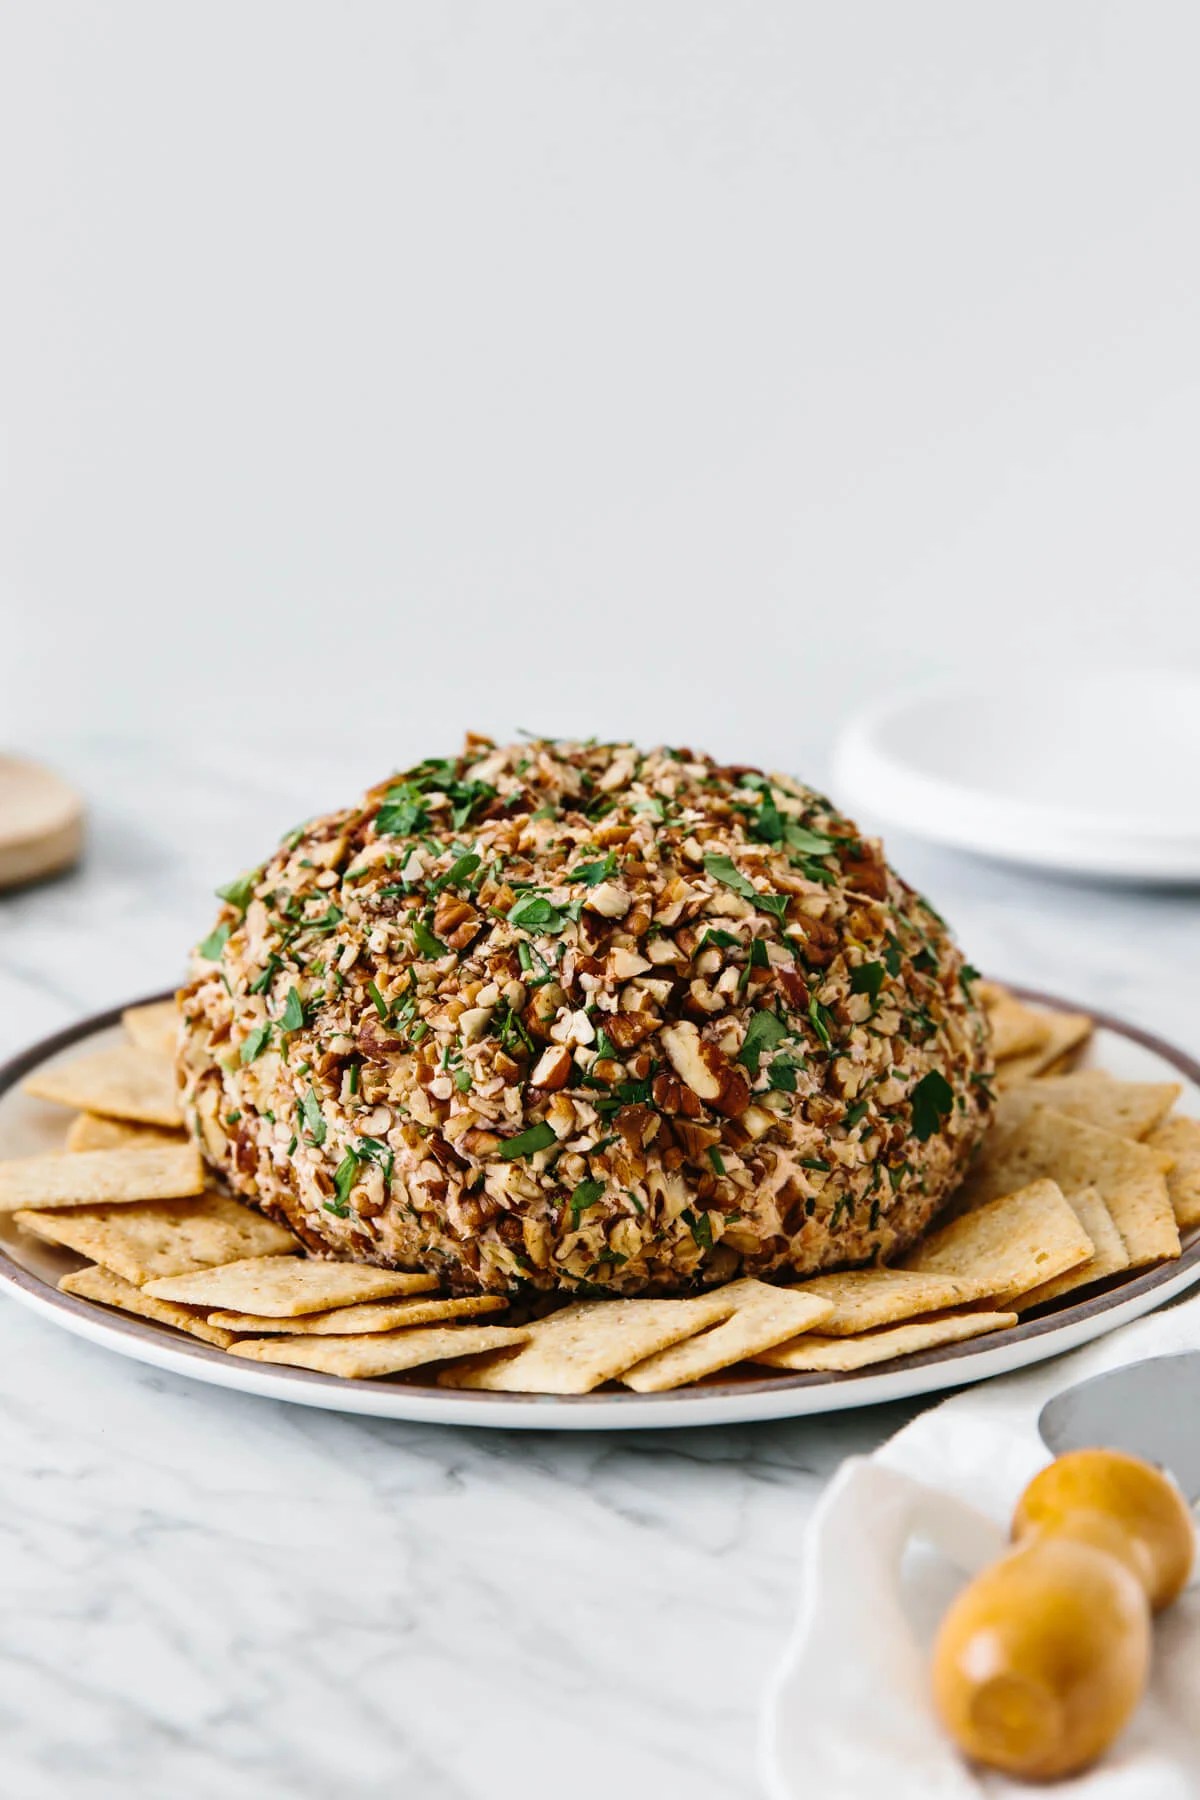 Smoked salmon cheese ball rolled in pecans and herbs.